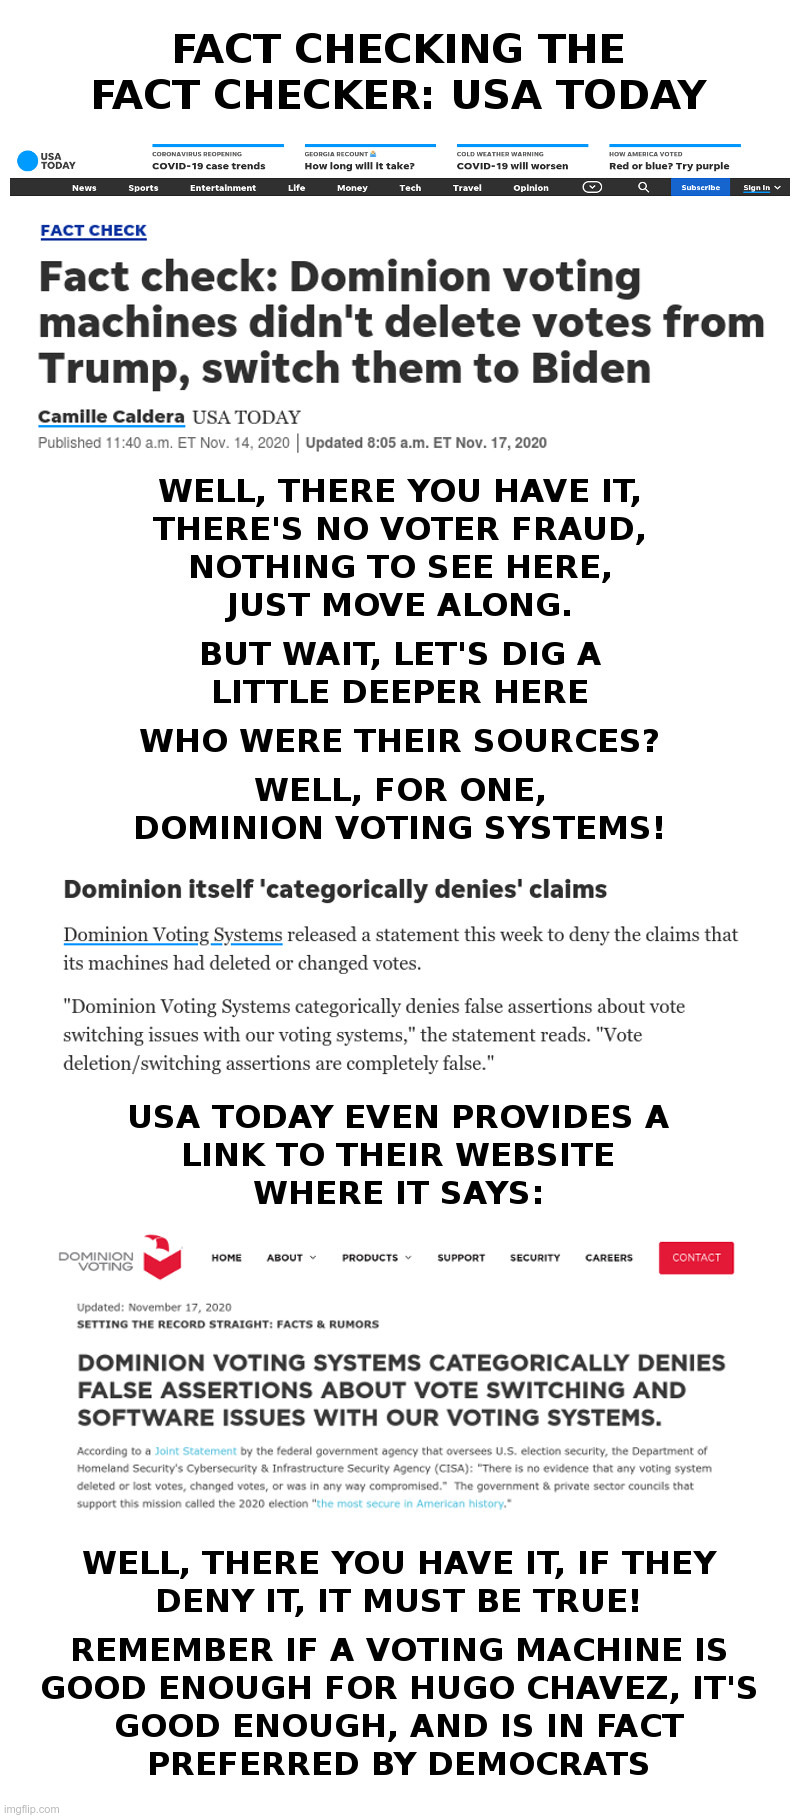 Fact Checking The Fact Checker: USA Today | image tagged in fact check,usa today,dominion voting systems,hugo chavez,democrats,voter fraud | made w/ Imgflip meme maker